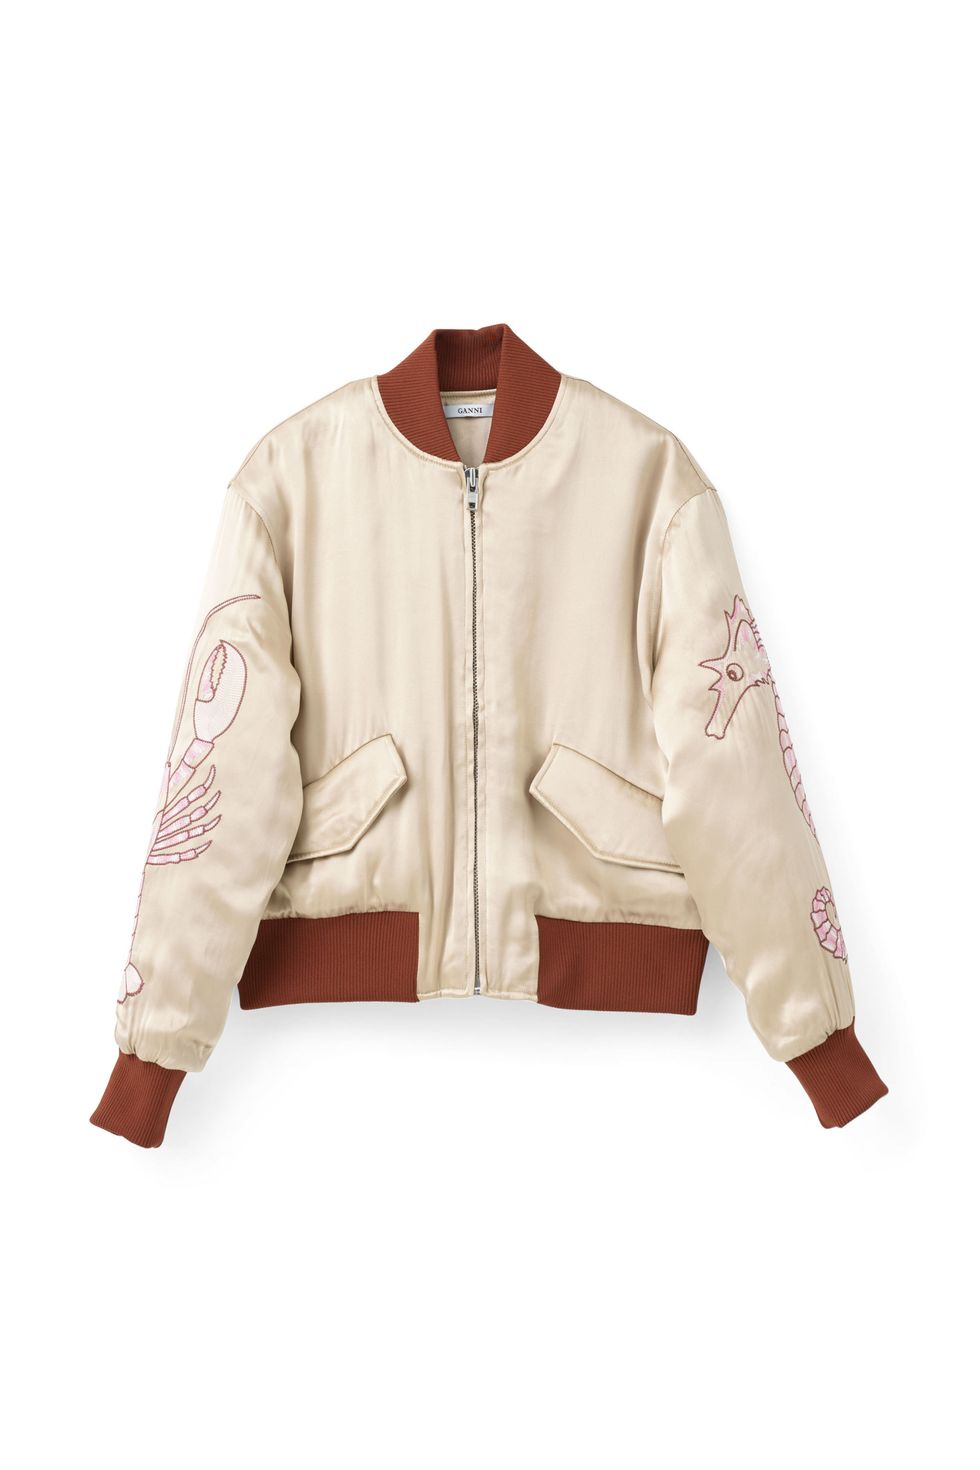 Clothing, White, Outerwear, Jacket, Sleeve, Leather jacket, Beige, Top, Leather, Sweater, 